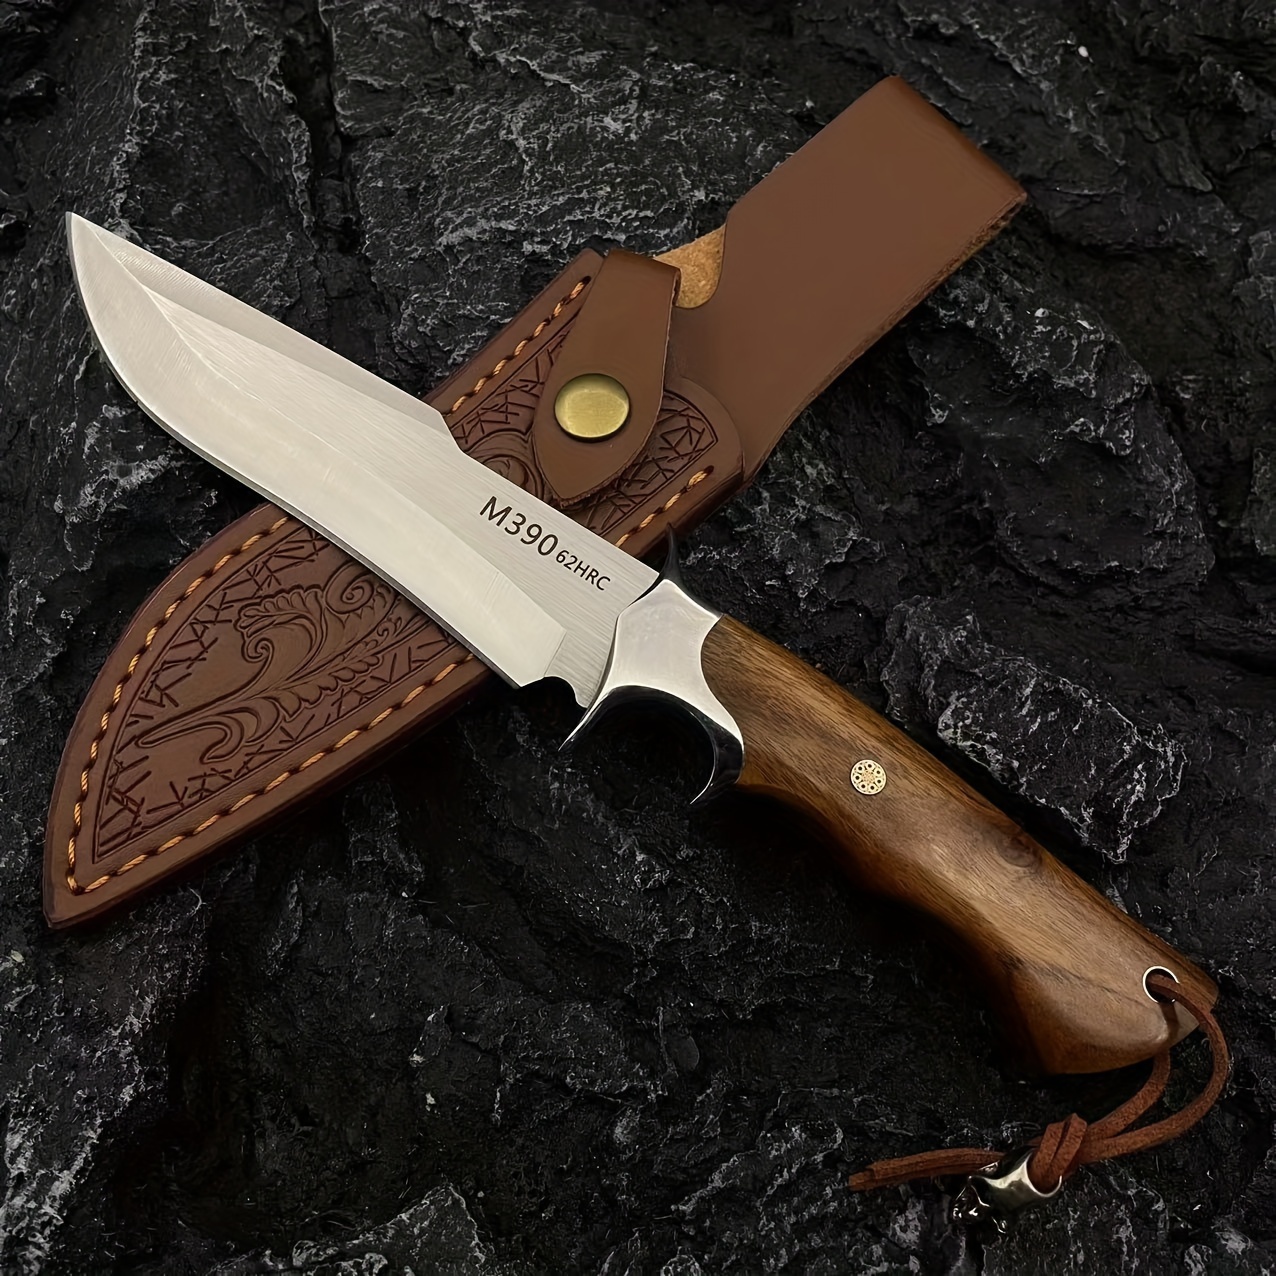  TMBrands High Carbon Steel Knife, Full Tang Bushcraft Knife -  Hunting Knife, Survival Knife, Fixed Blade Knife & Camping Knife with Rose  Wood Handle & Leather Knife Sheath : Sports